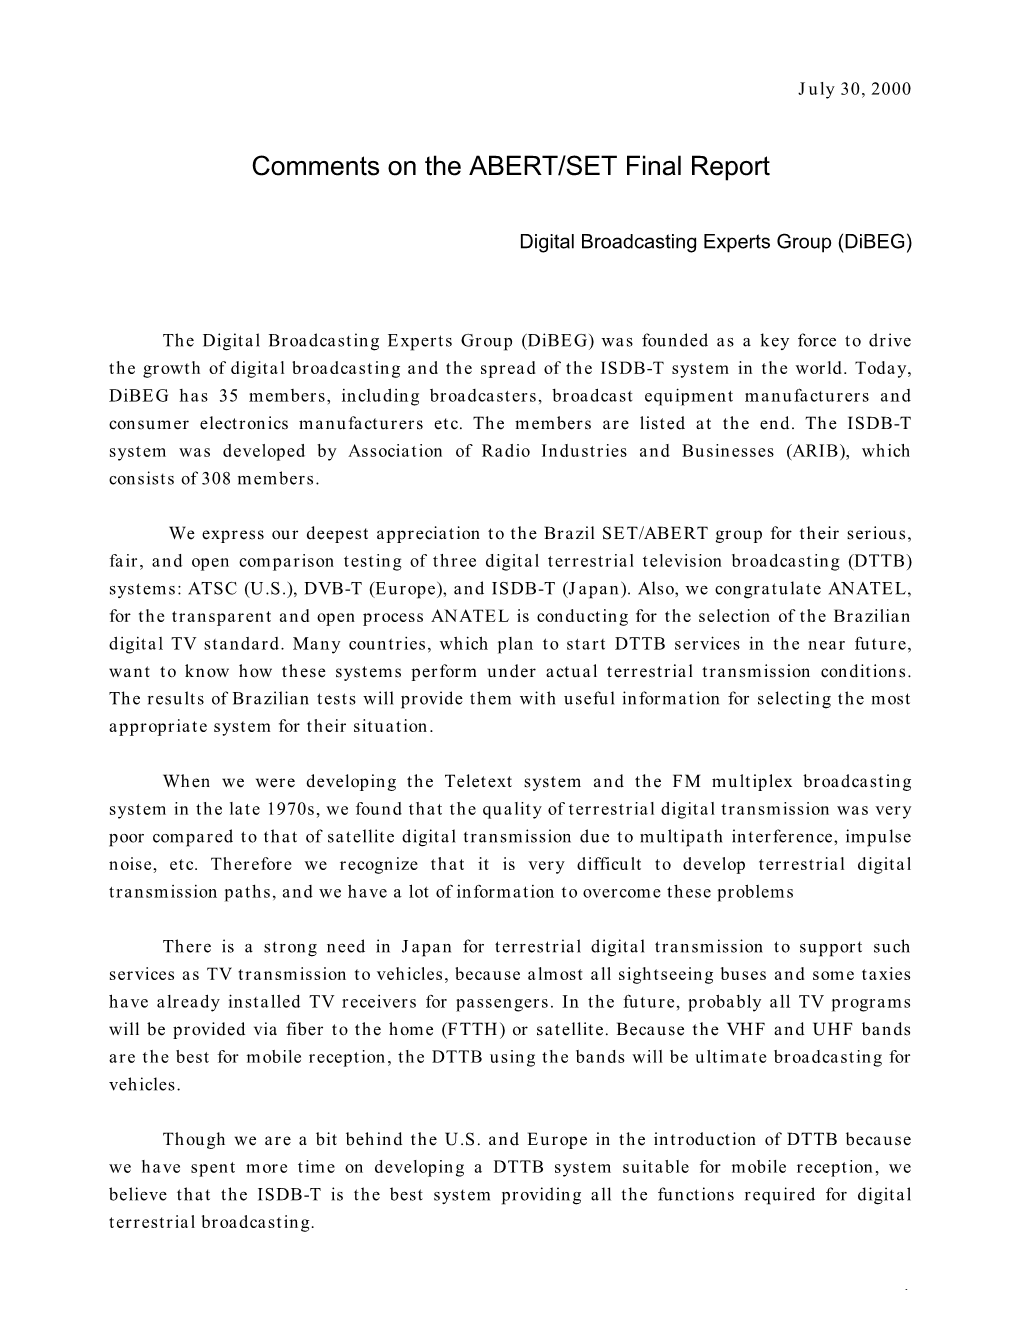 Comments on the ABERT/SET Final Report